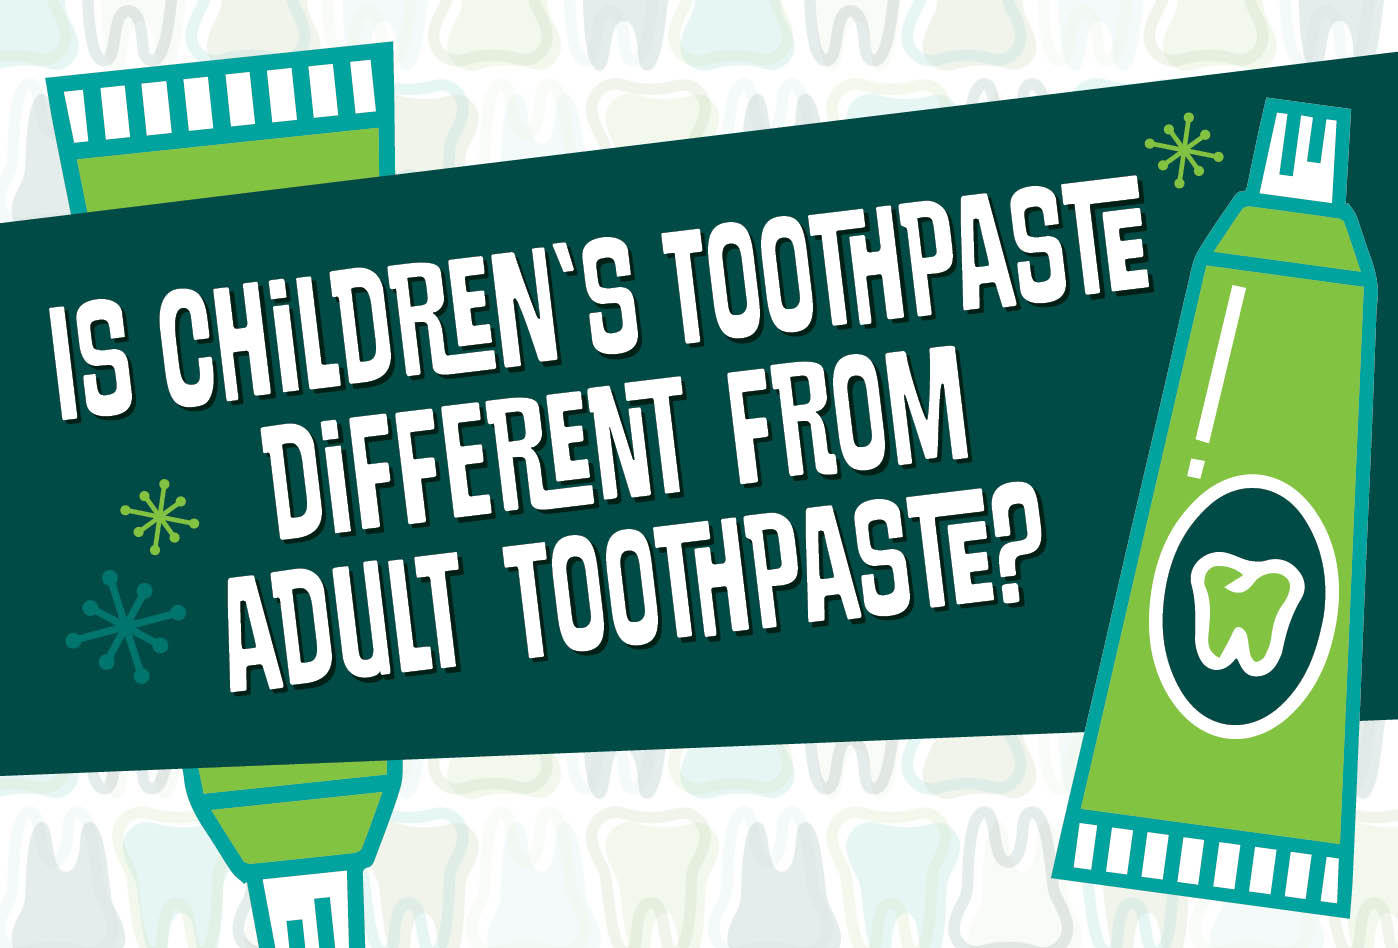 Is childrens toothpaste different from adult toothpaste